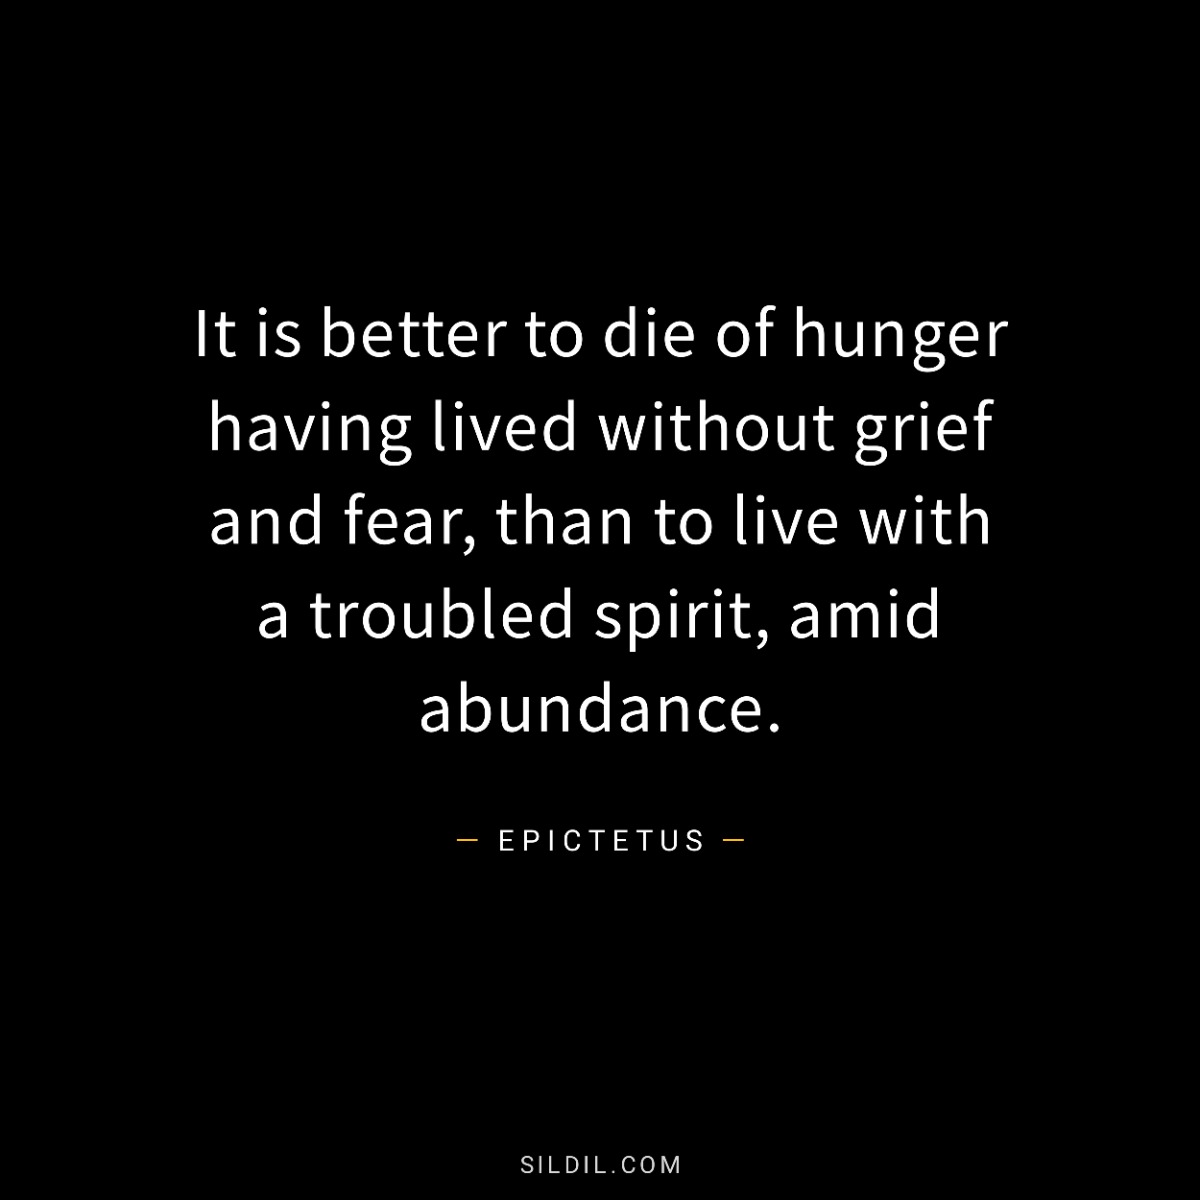 It is better to die of hunger having lived without grief and fear, than to live with a troubled spirit, amid abundance.